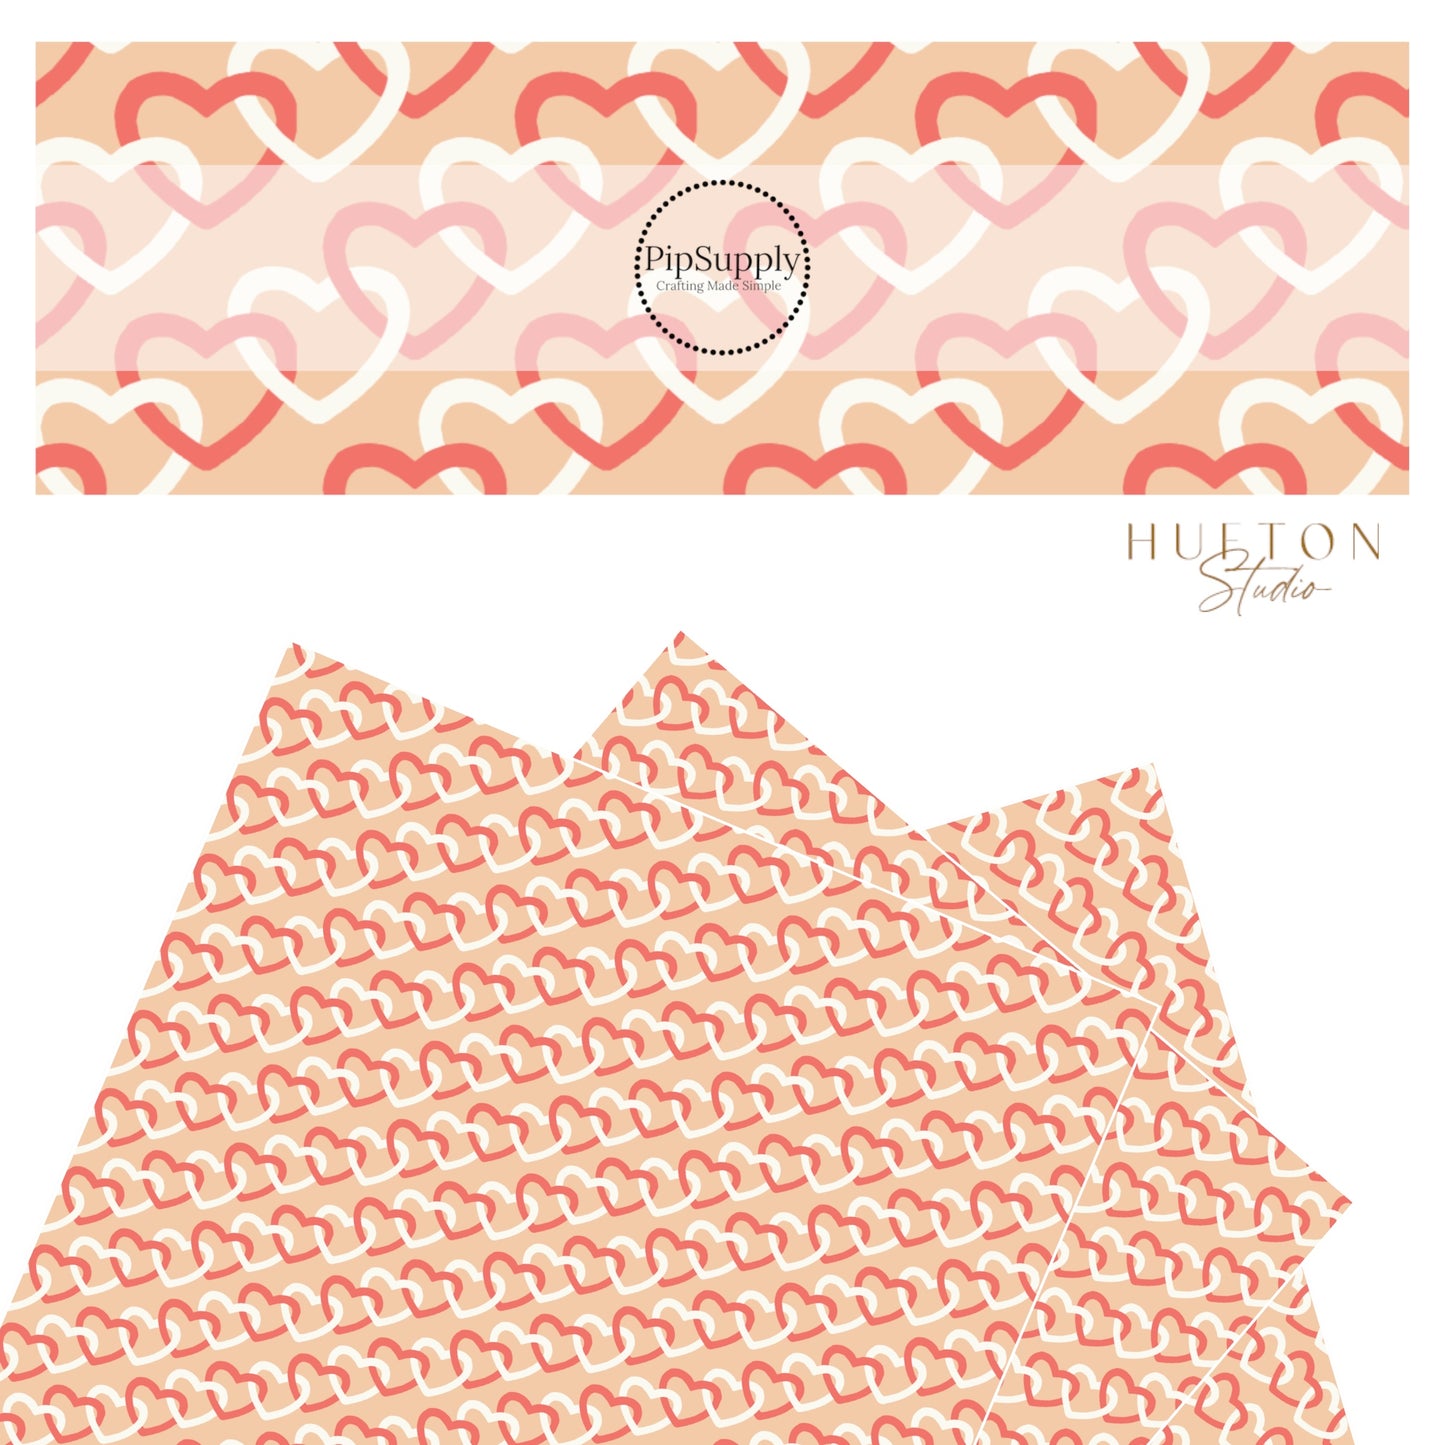 Hot pink and white chain hearts on a peach faux leather sheet